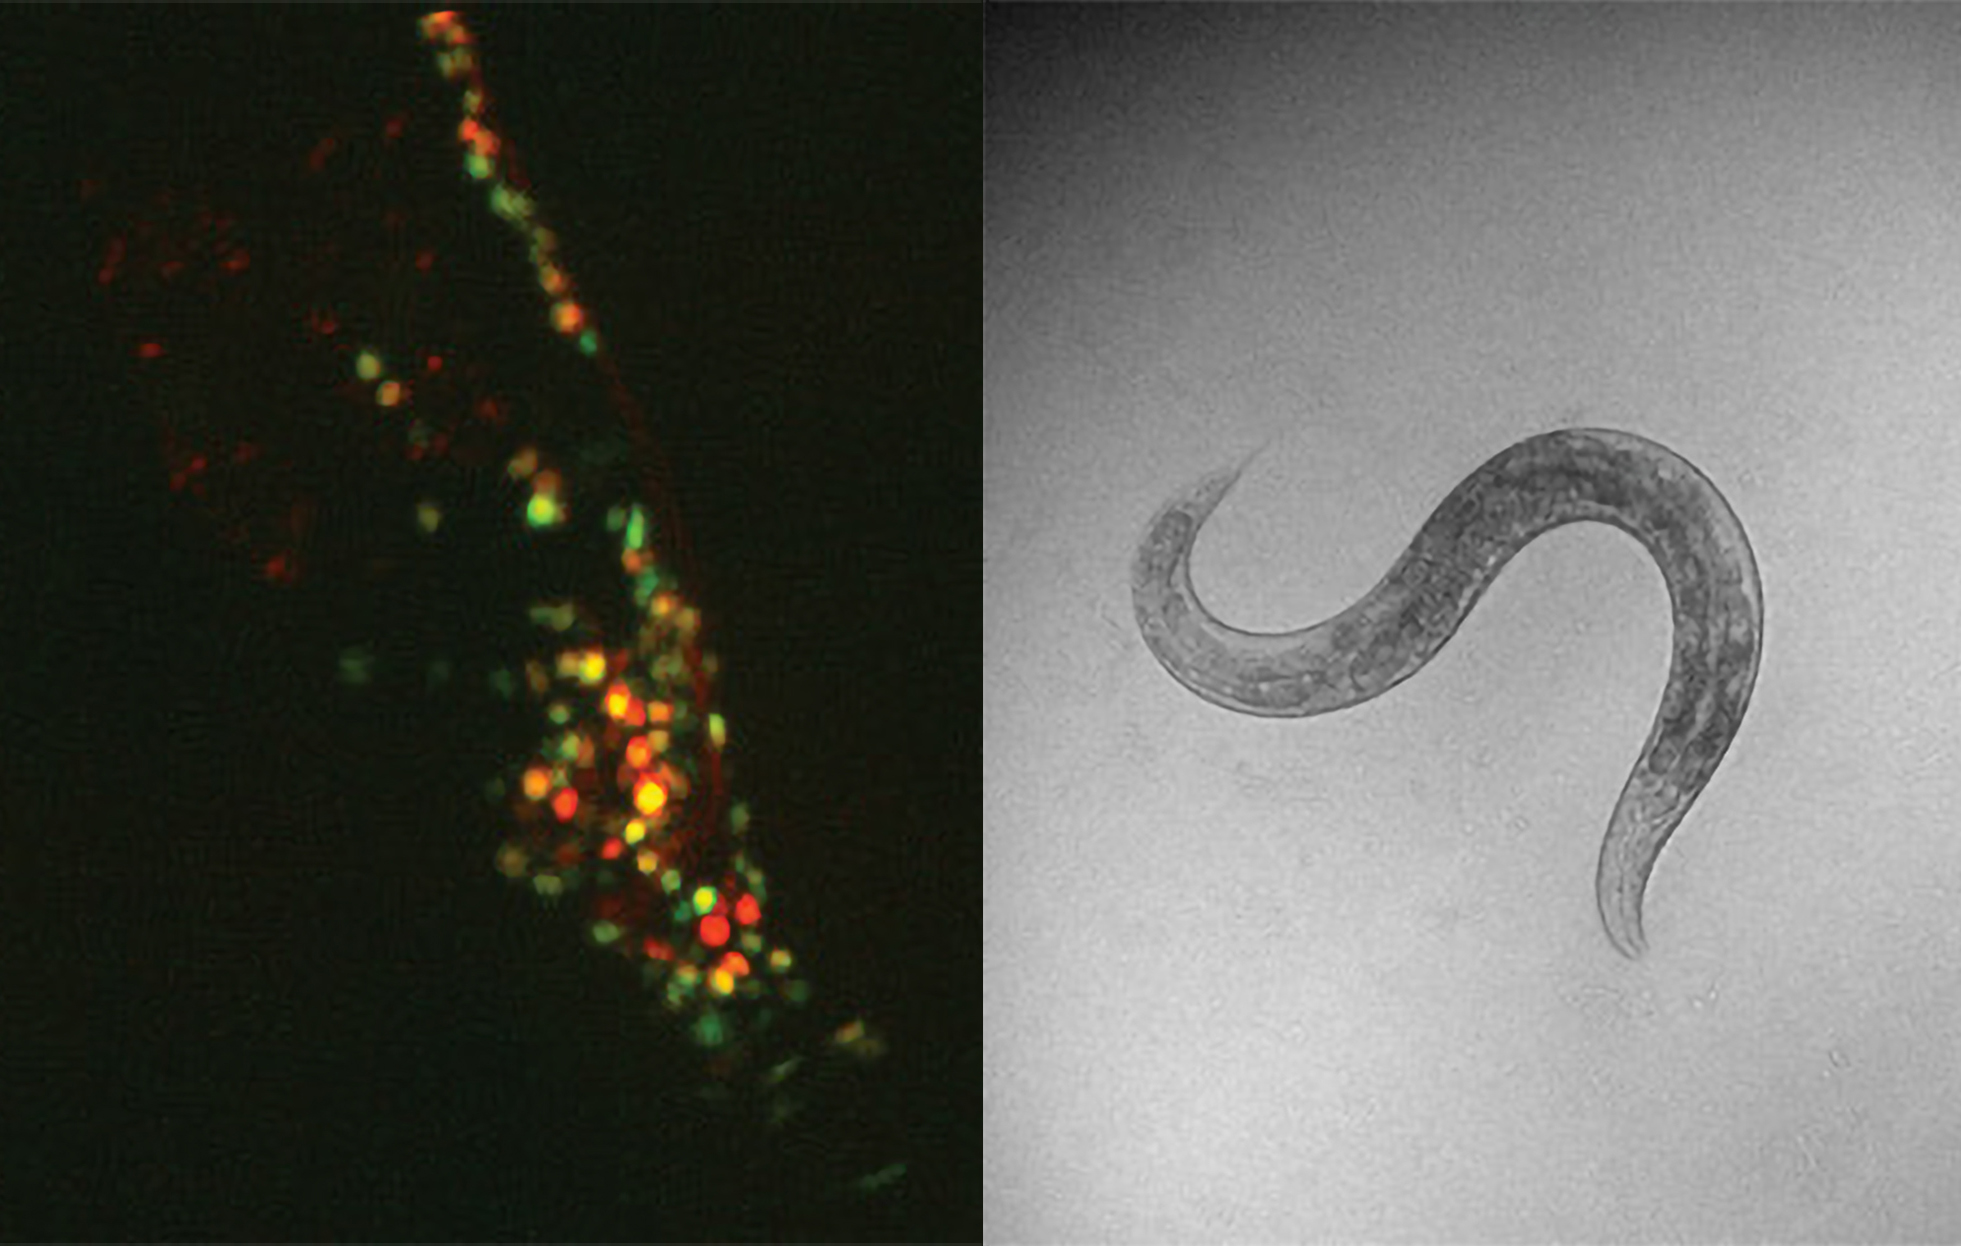 A left panel shows a worm's head all dark except its neurons lit up red and green. A second panel shows a black and white image of the whole worm curling up.